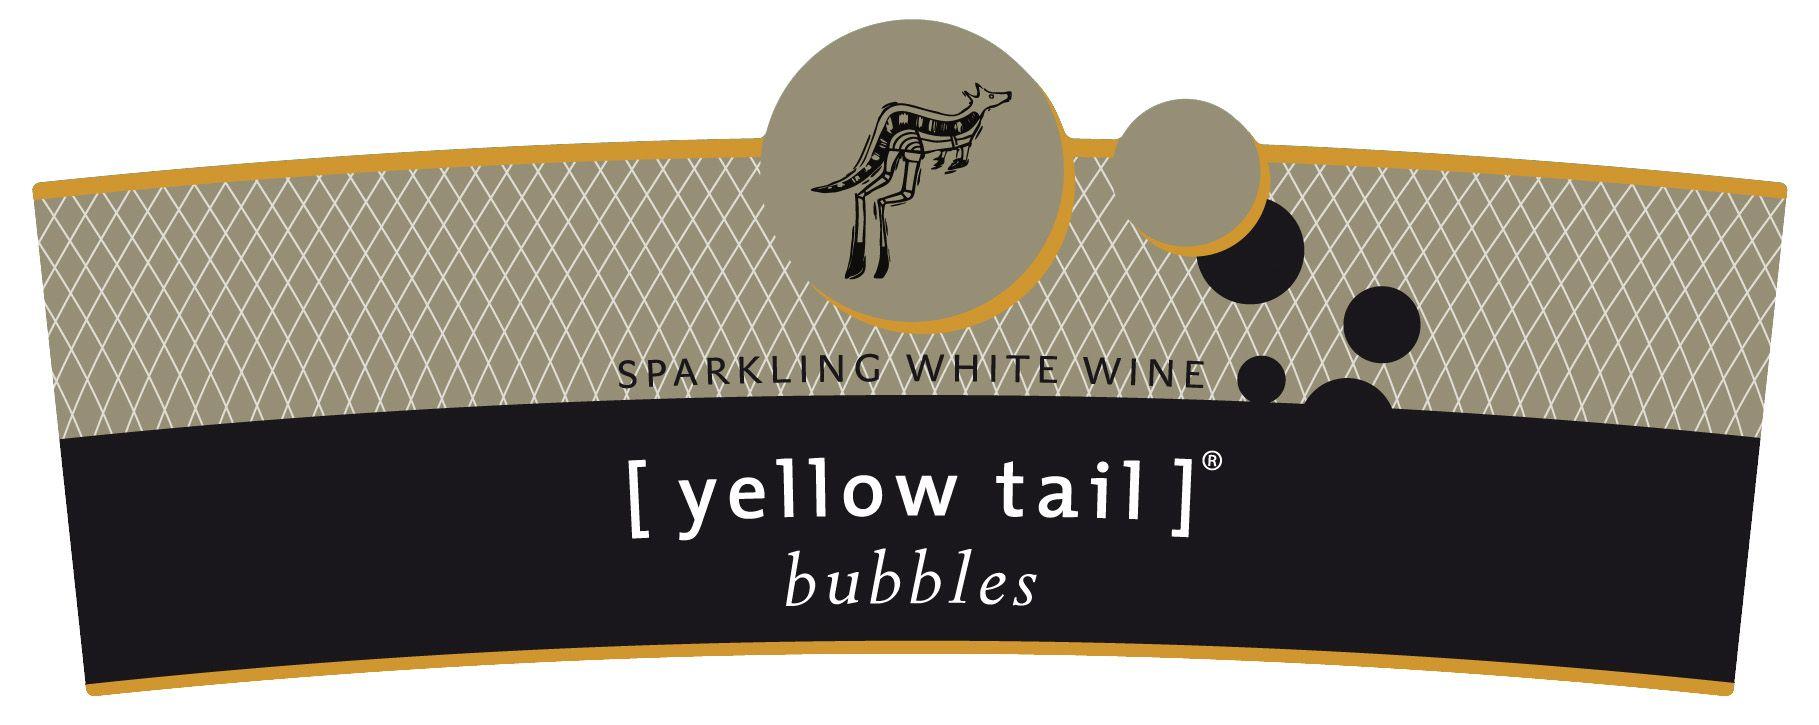 Yellow Tail Logo - yellow tail ]® Bubbles Wines | Retailers | Download| High Resolution ...